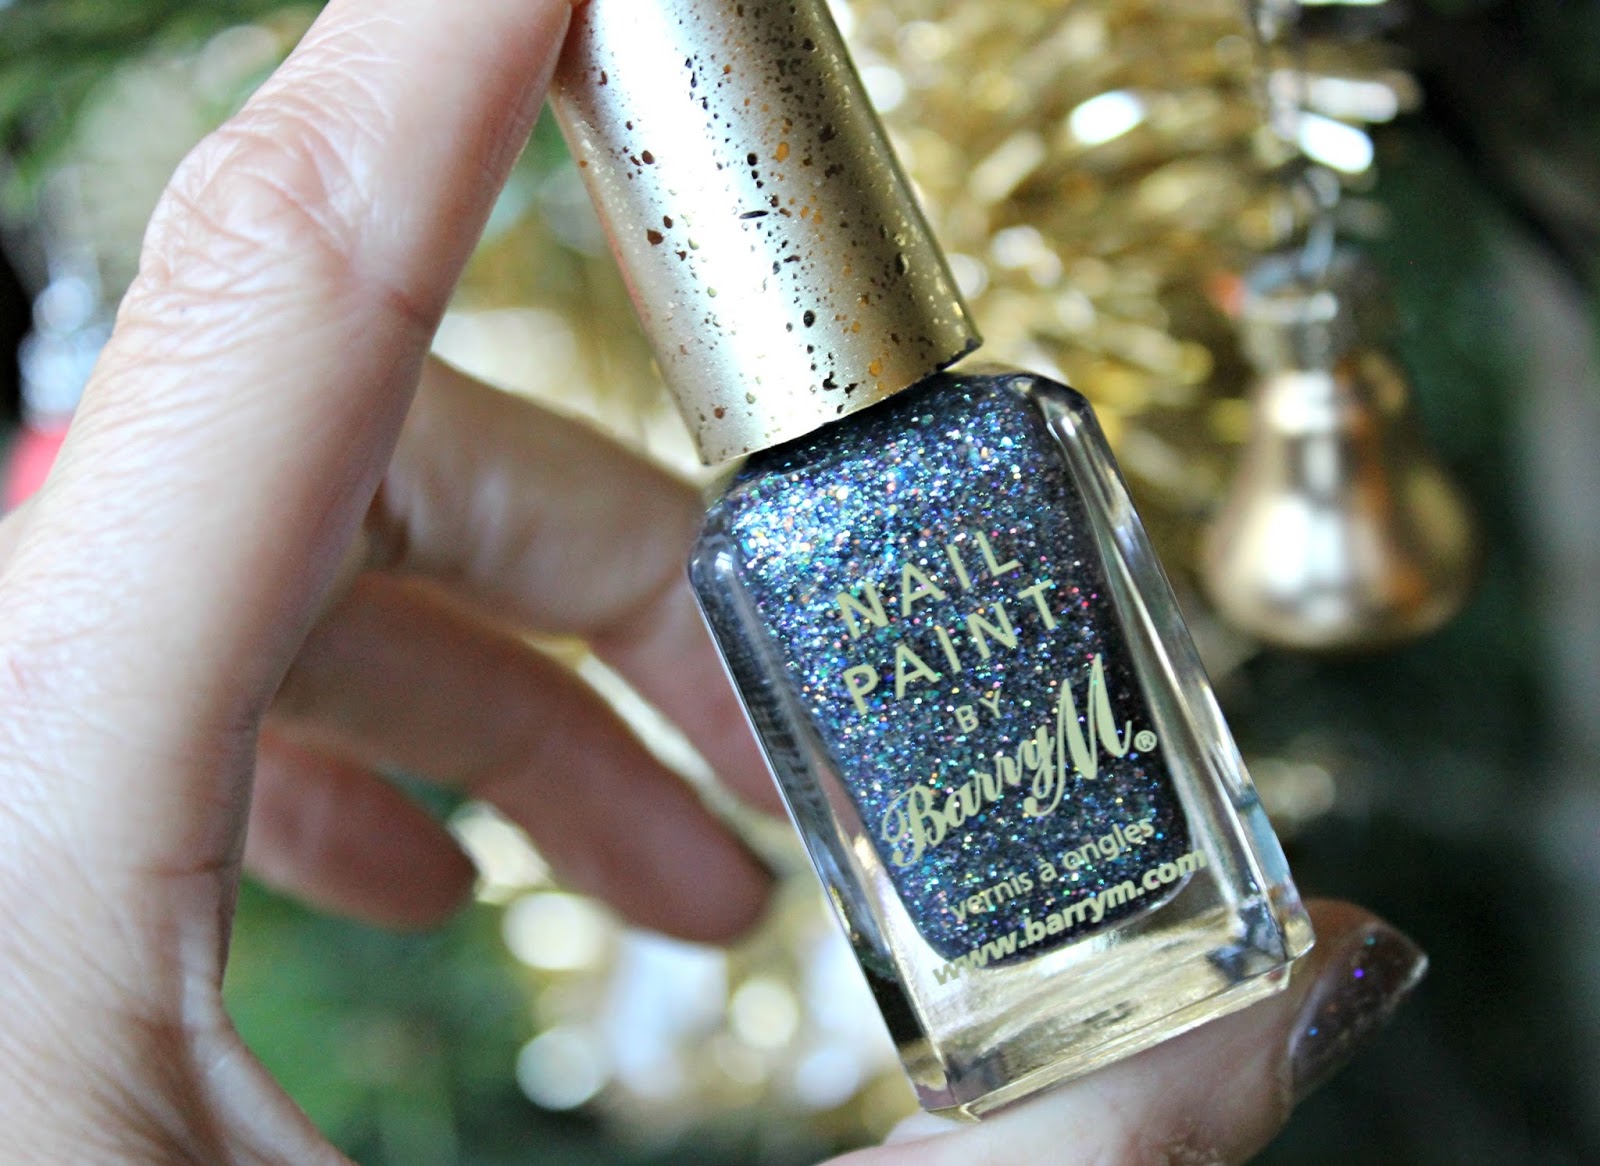 A picture of the Barry M Glitterati Nail Paint in Rockstar